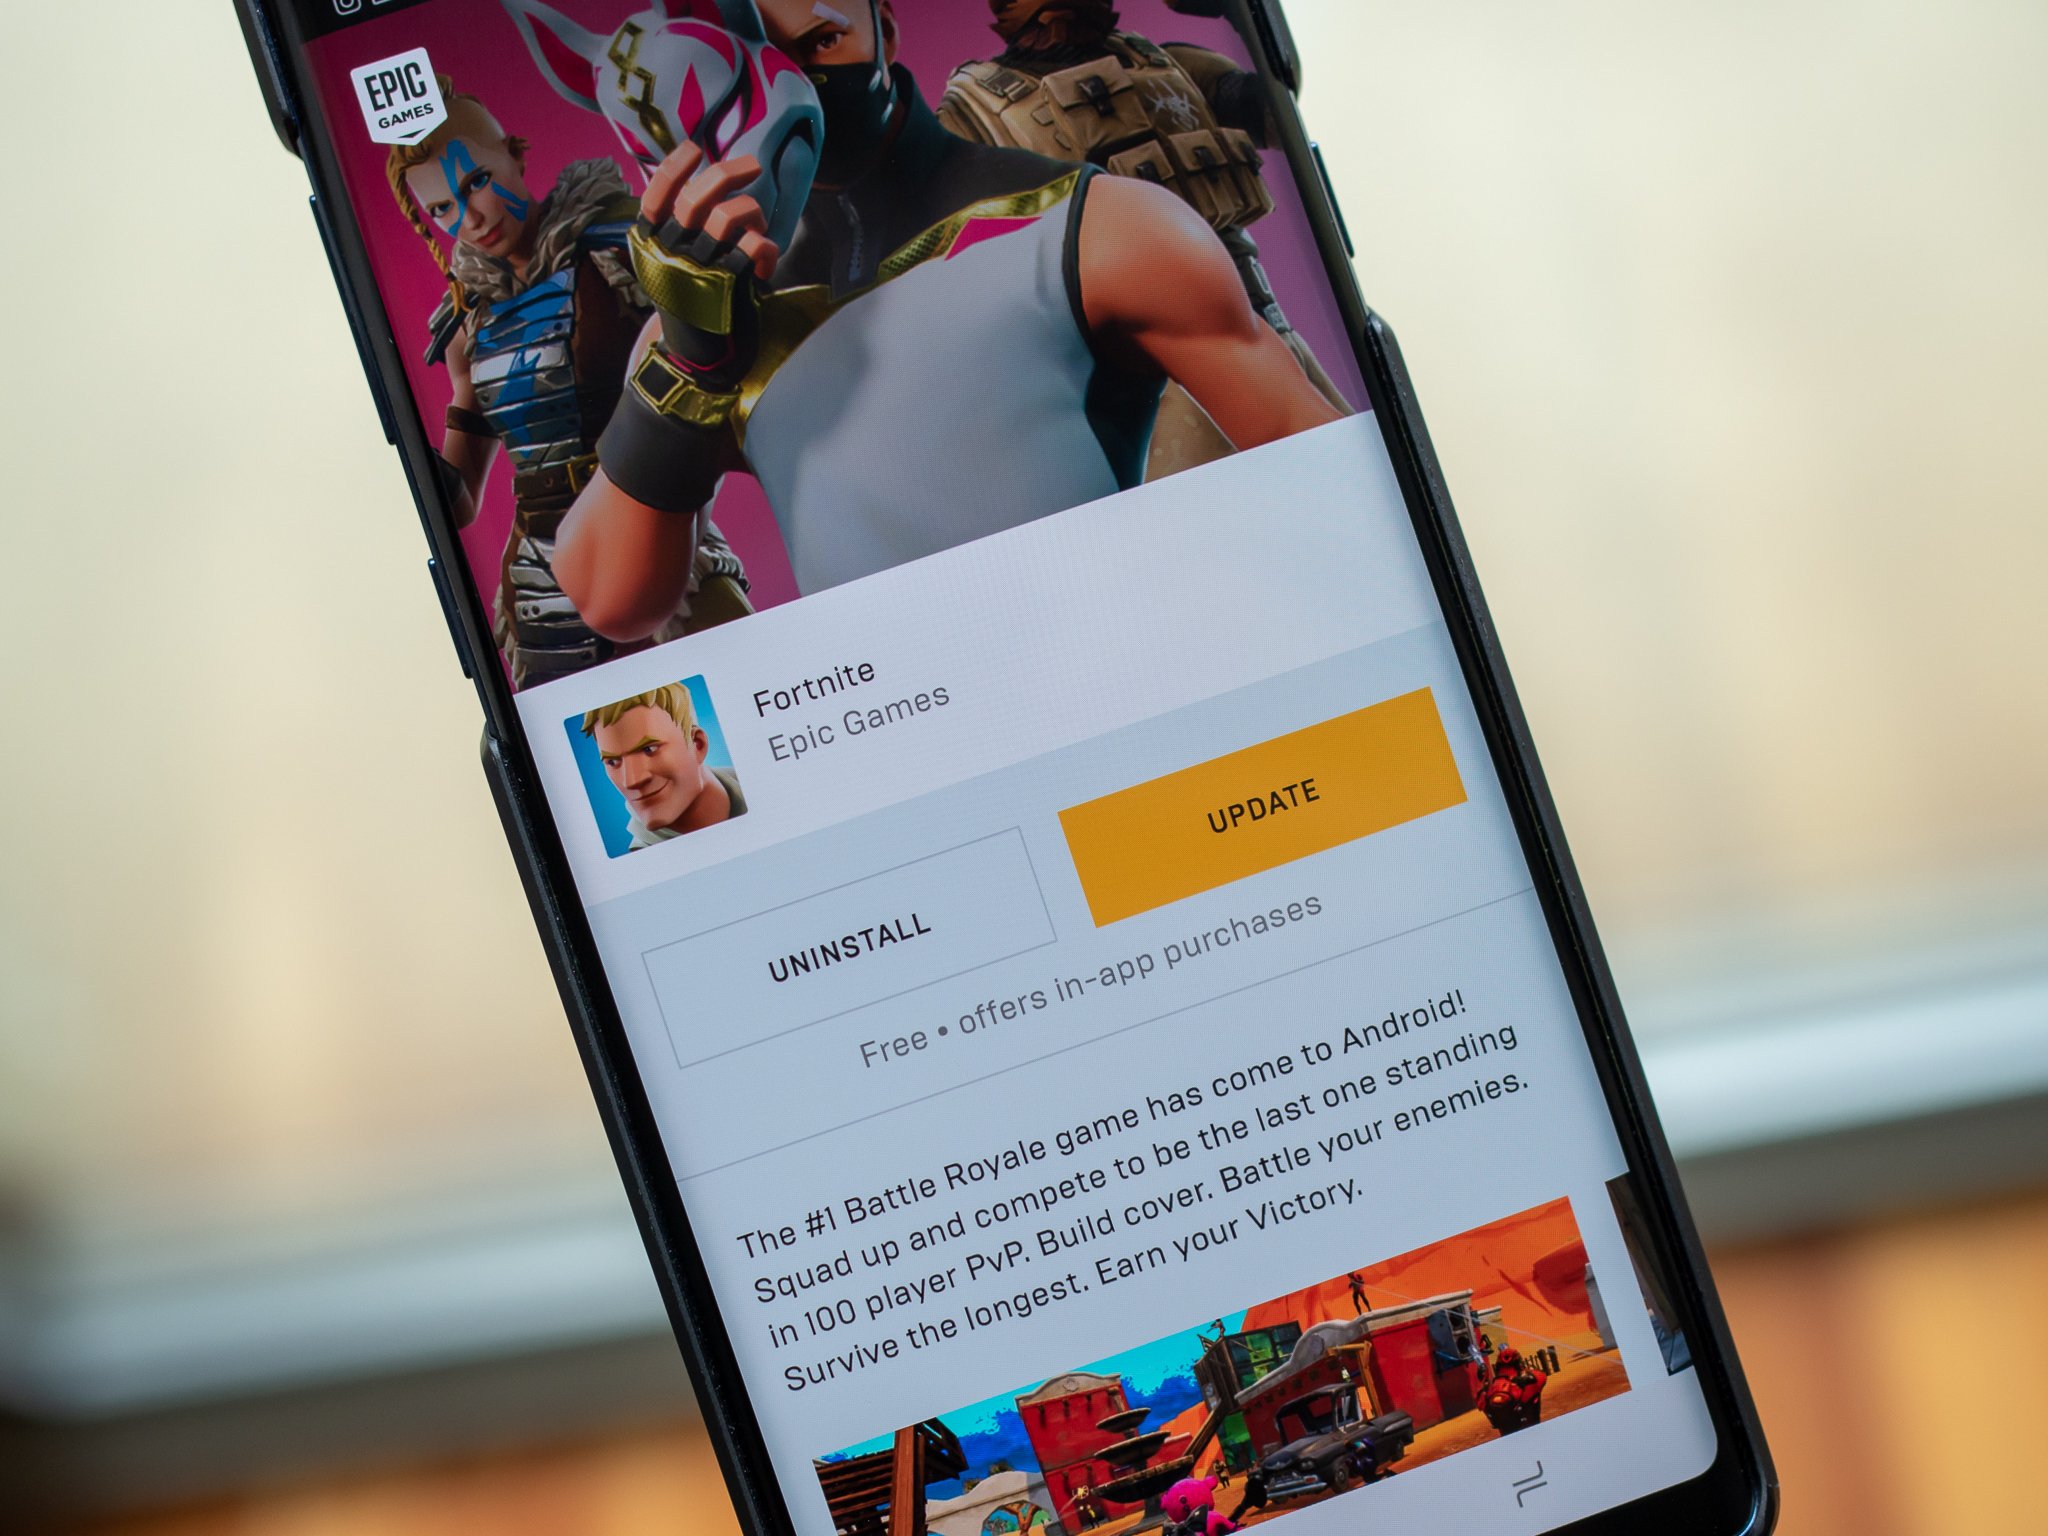 epic s first fortnite installer allowed hackers to download and install anything on your android phone silently - fortnite game kostenlos